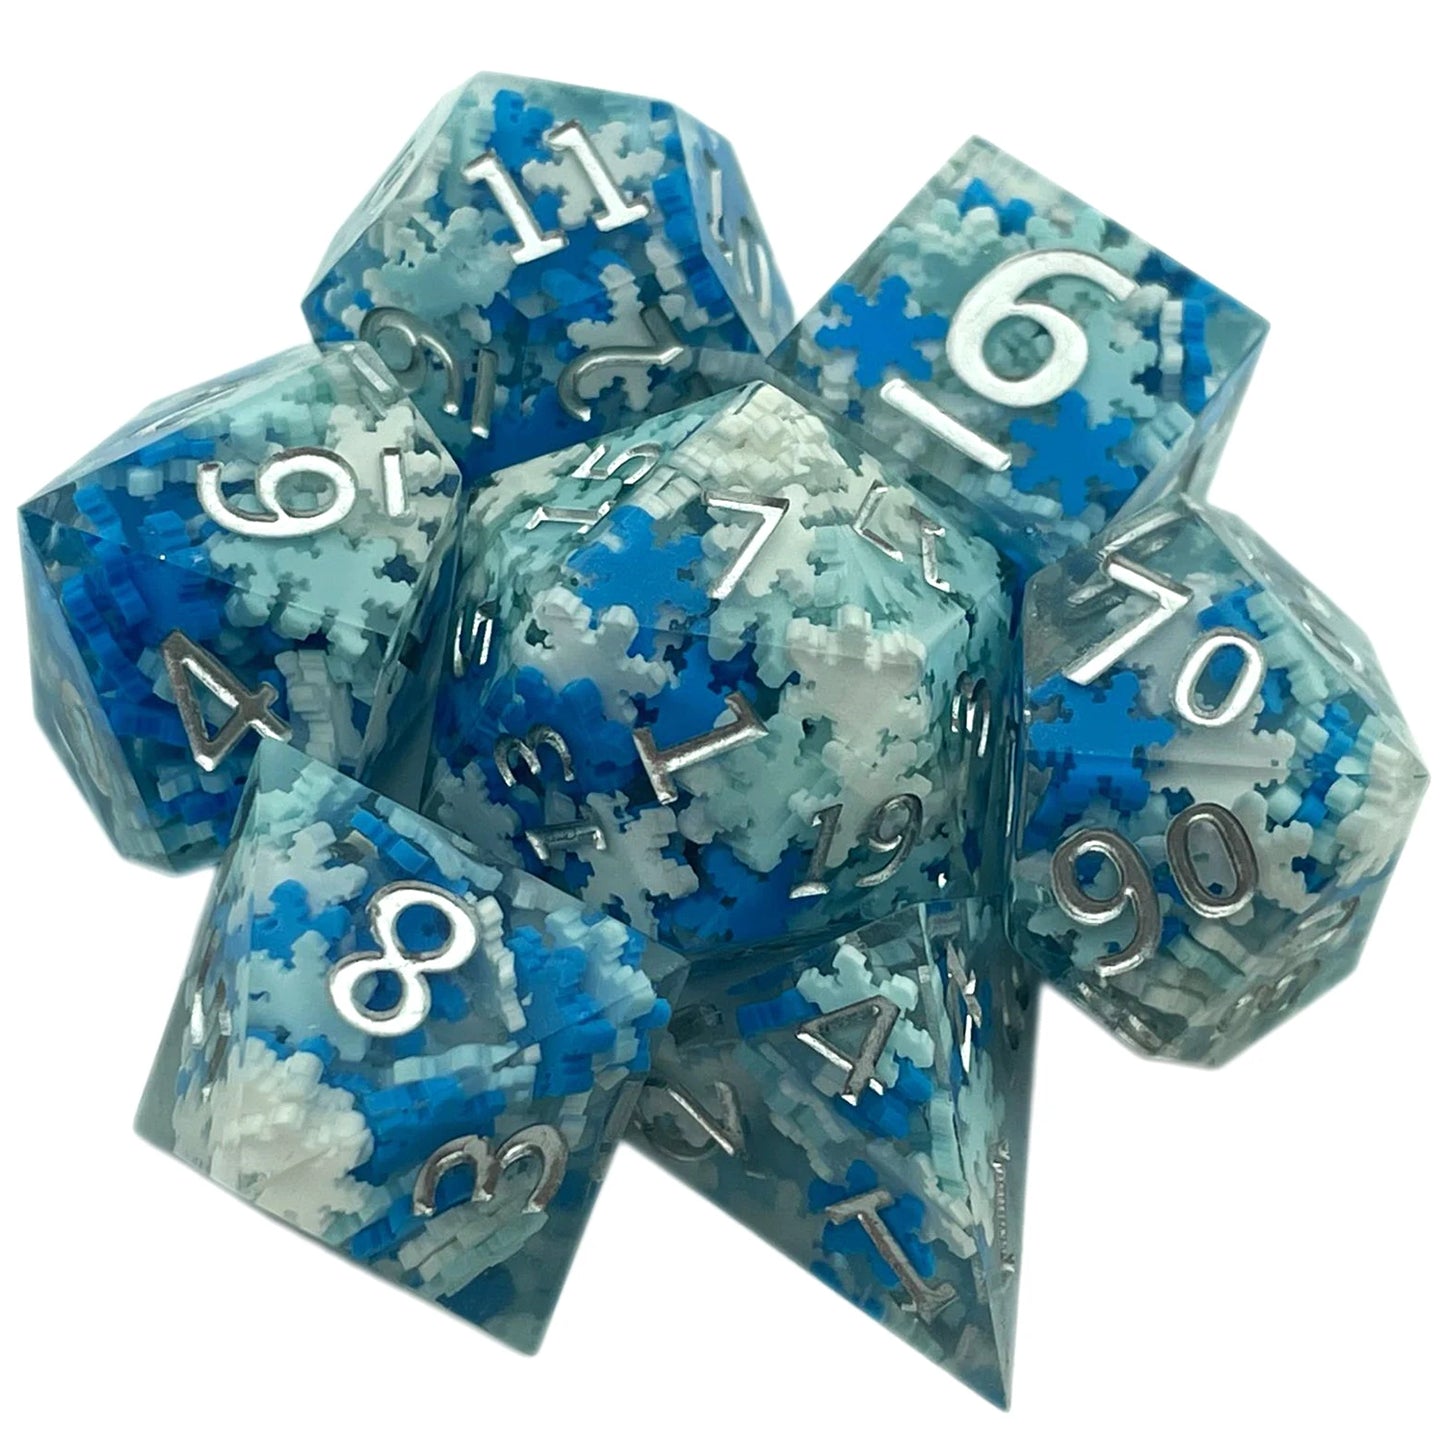 Solid Polyhedral Dice for Role Playing, Resin Dice, Dragon Scale, D, Rpg, Rol, Pathfinder, Board Game, Gifts, 7PCs, 2023